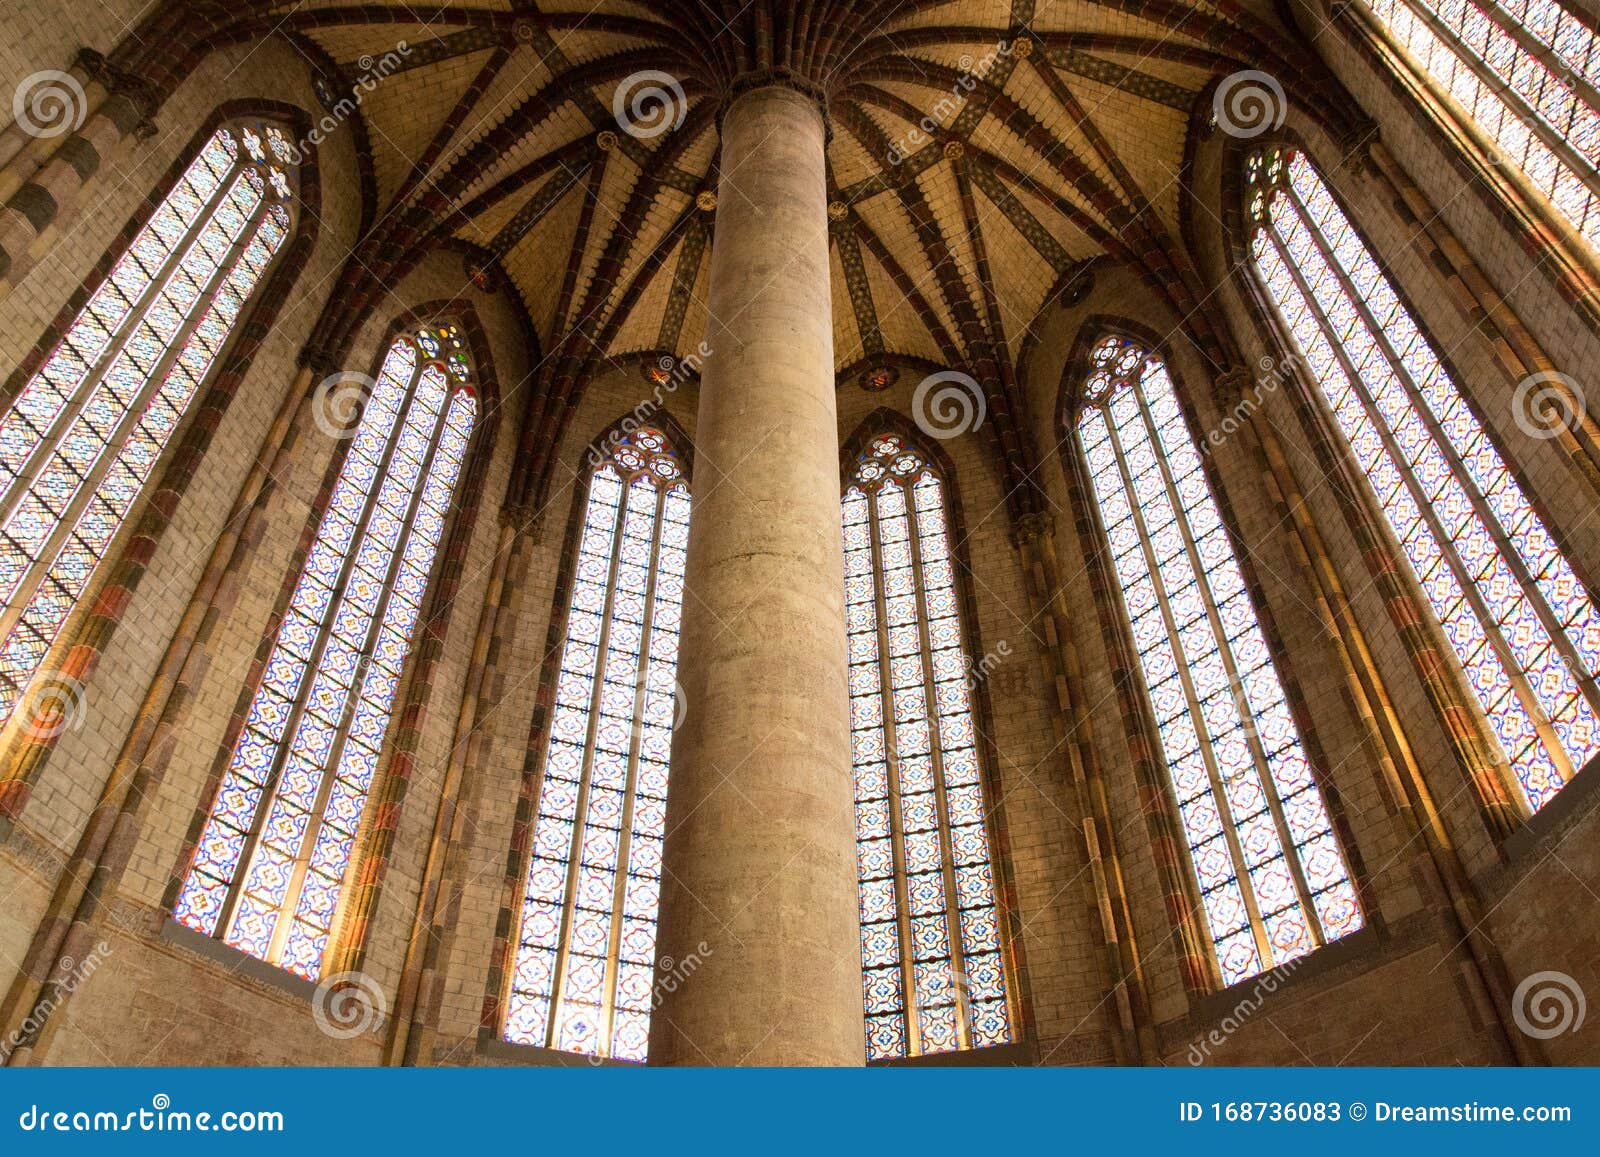 interior of the toulouse cathedral, france